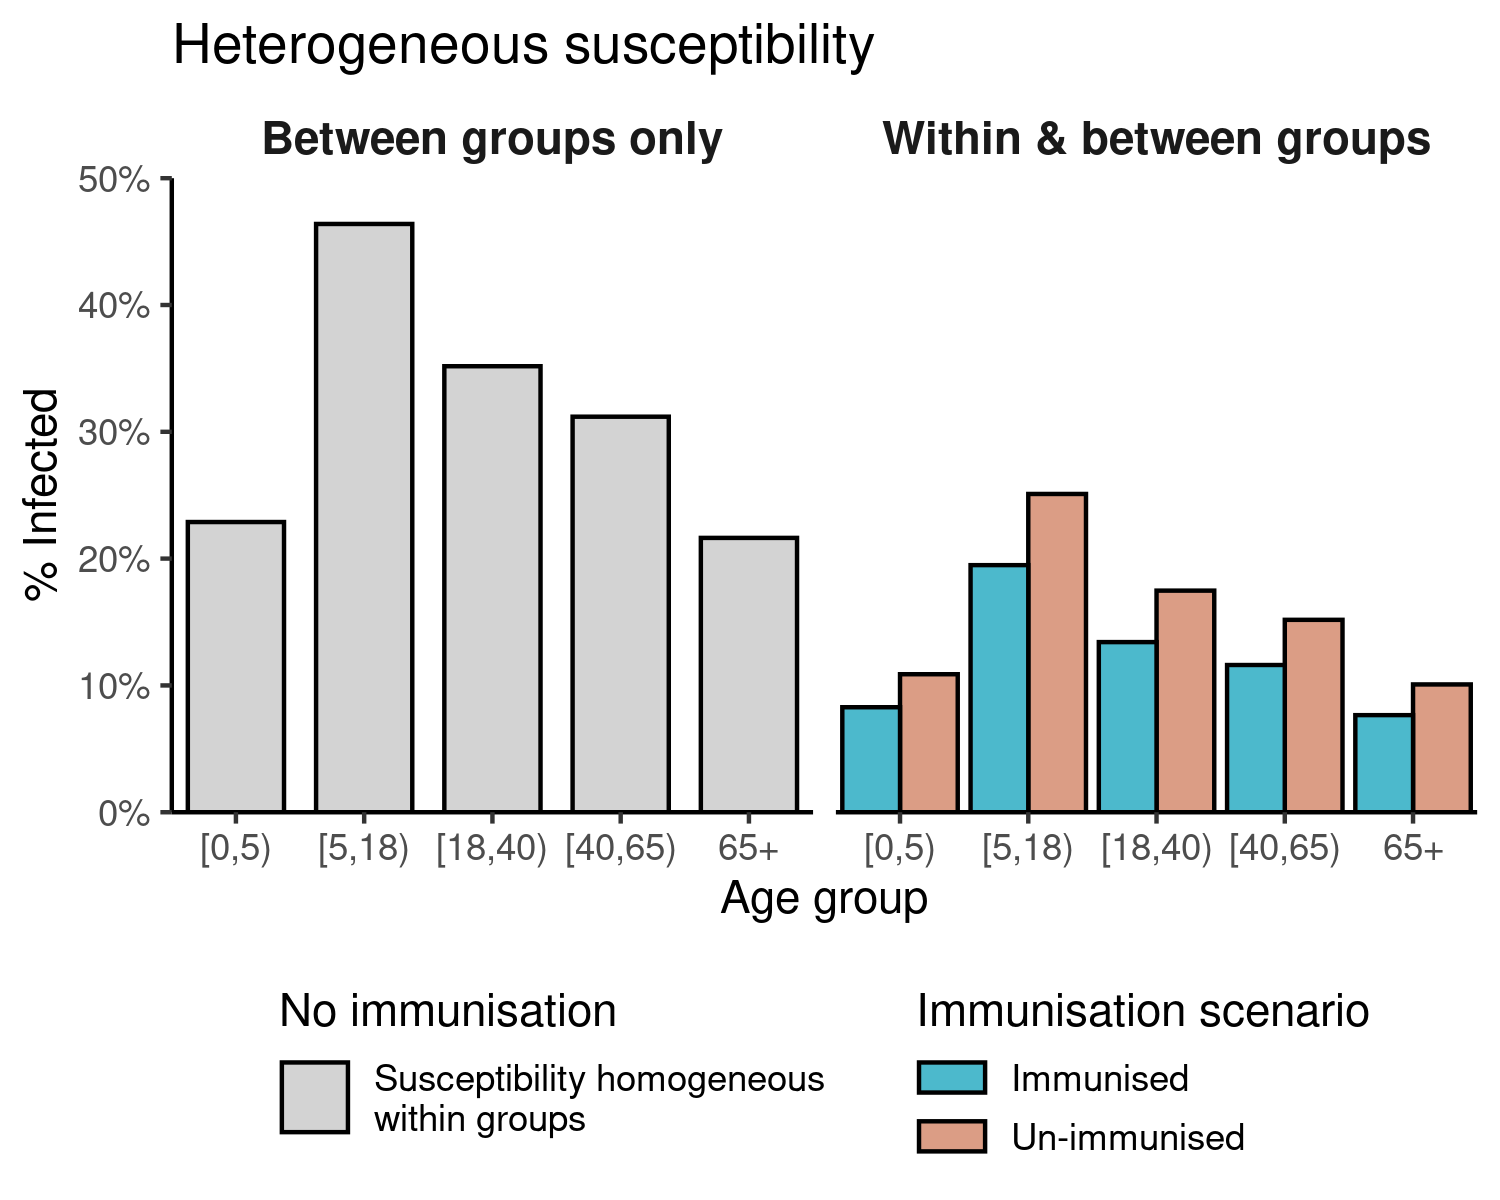 Final size of an SIR epidemic with $R_0$ = 1.5, in a population wherein 50% of each age group is immunised against the infection. The immunisation is assumed to reduce the initial susceptibility of each age group by 25%. This leads to both within- and between-group heterogeneity in susceptibility. Vaccinating even 50% of each age group can substantially reduce the epidemic final size in comparison with a scenario in which there is no immunisation (grey). Note that the final sizes in this figure are all below 50%.